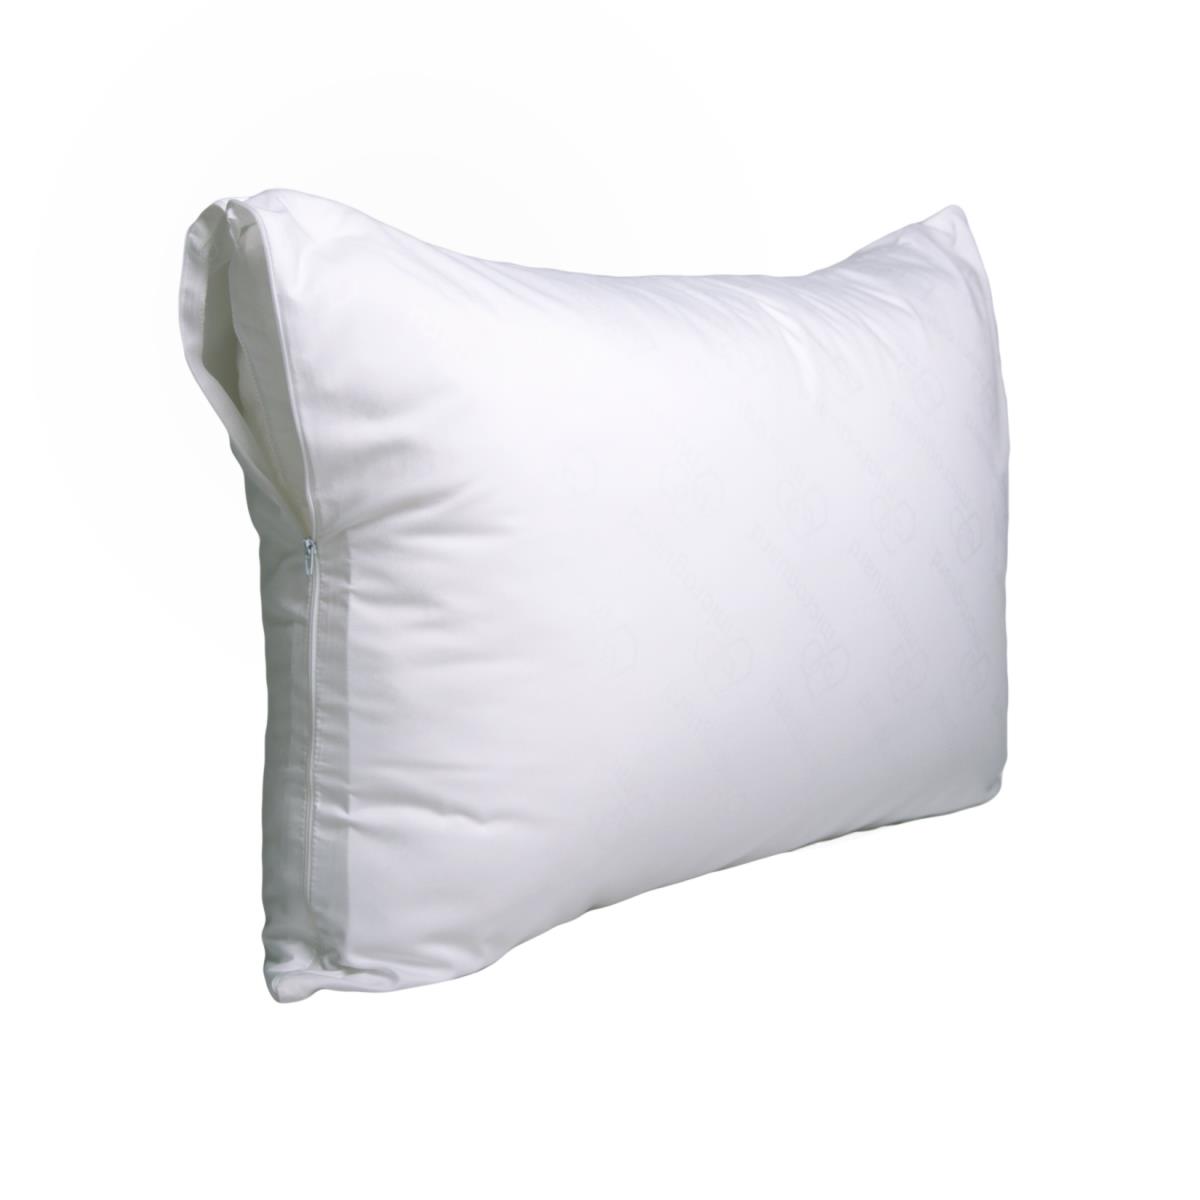 Signature Home UNB-500-9987 Basics Polyester Pillow Protector for King Size Bed - Pack of 2